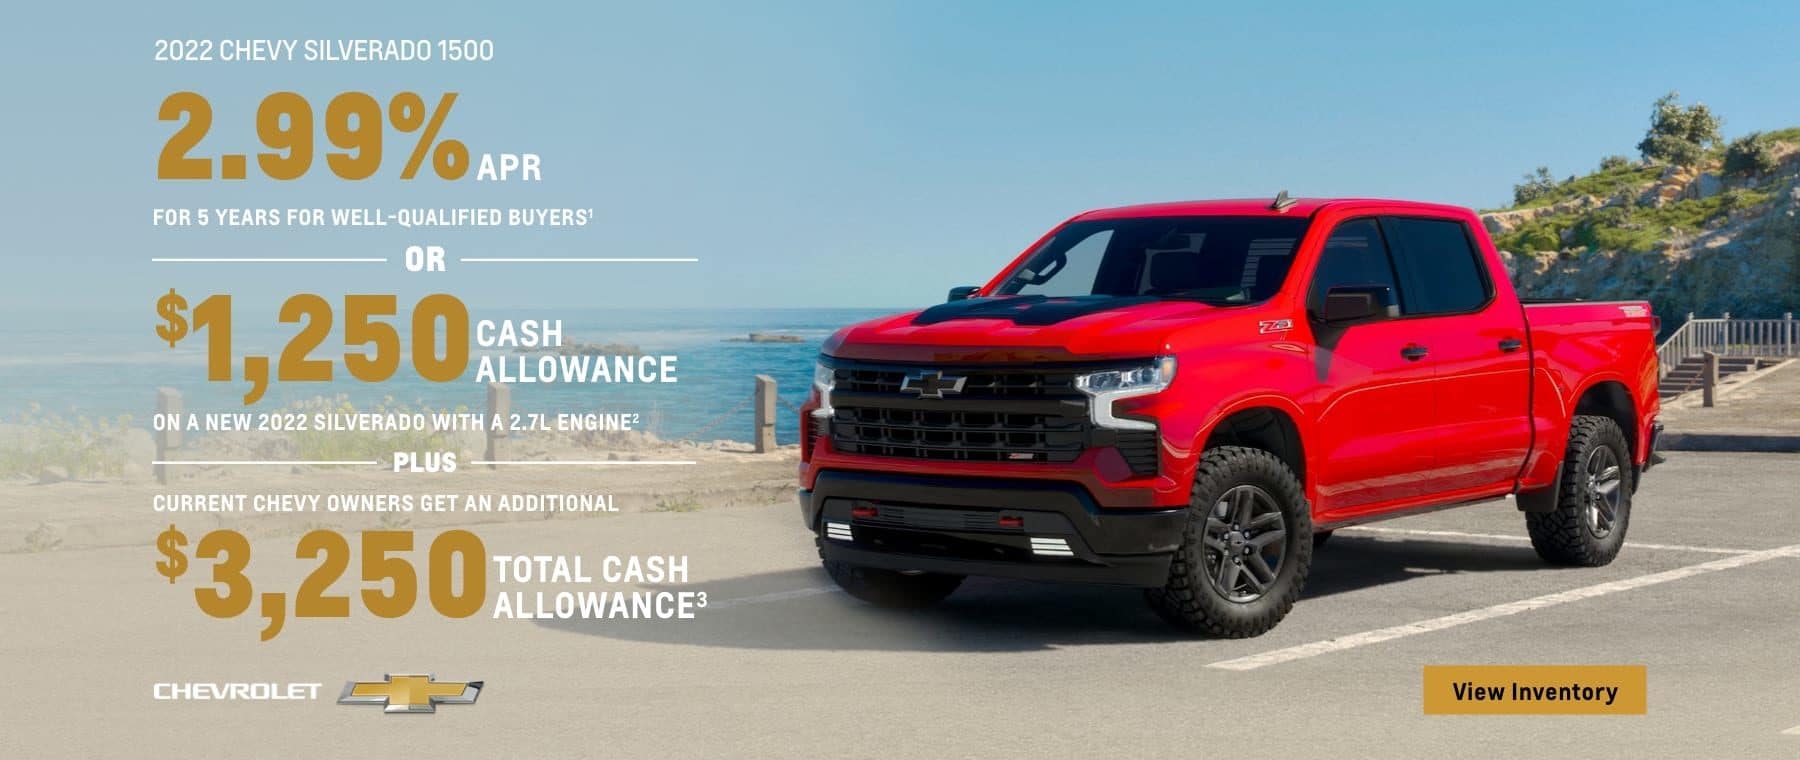 2022 Chevy Silverado 1500. 2.99% APR for 5 years for well-qualified buyers. Or, $1,250 cash allowance on a new 2022 Silverado with a 2.7L engine. Plus, current Chevy owners get an additional $3,250 total cash allowance.